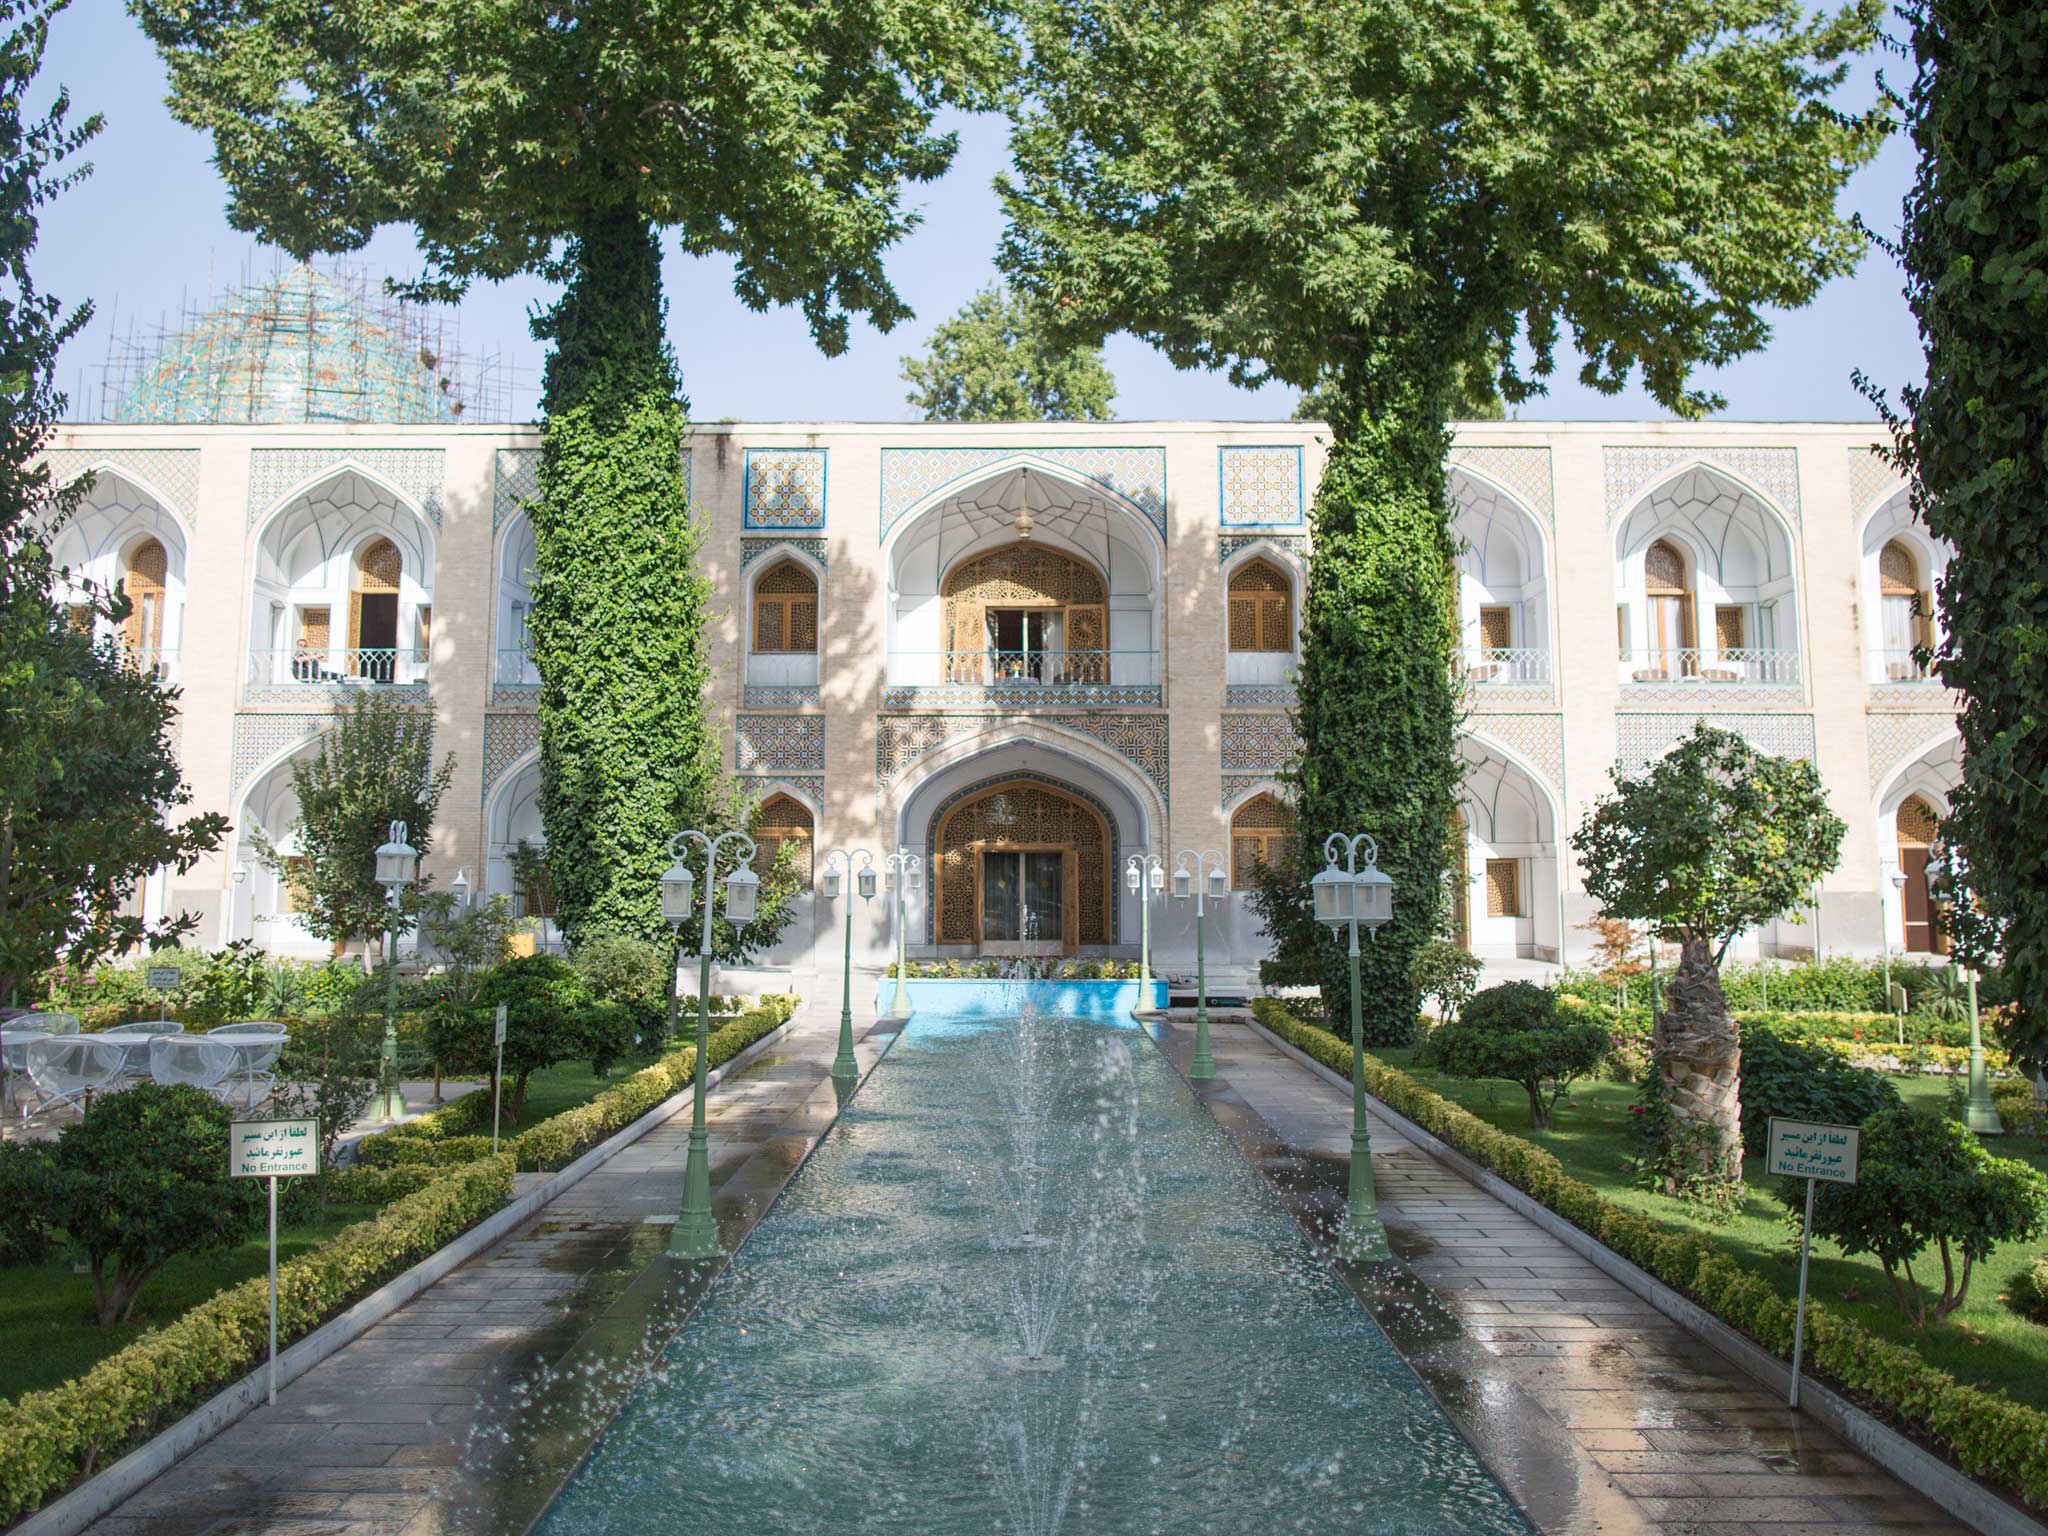 The famed Abbasi Hotel is considered a beautiful attraction in its own right for its atmosphere and gardens